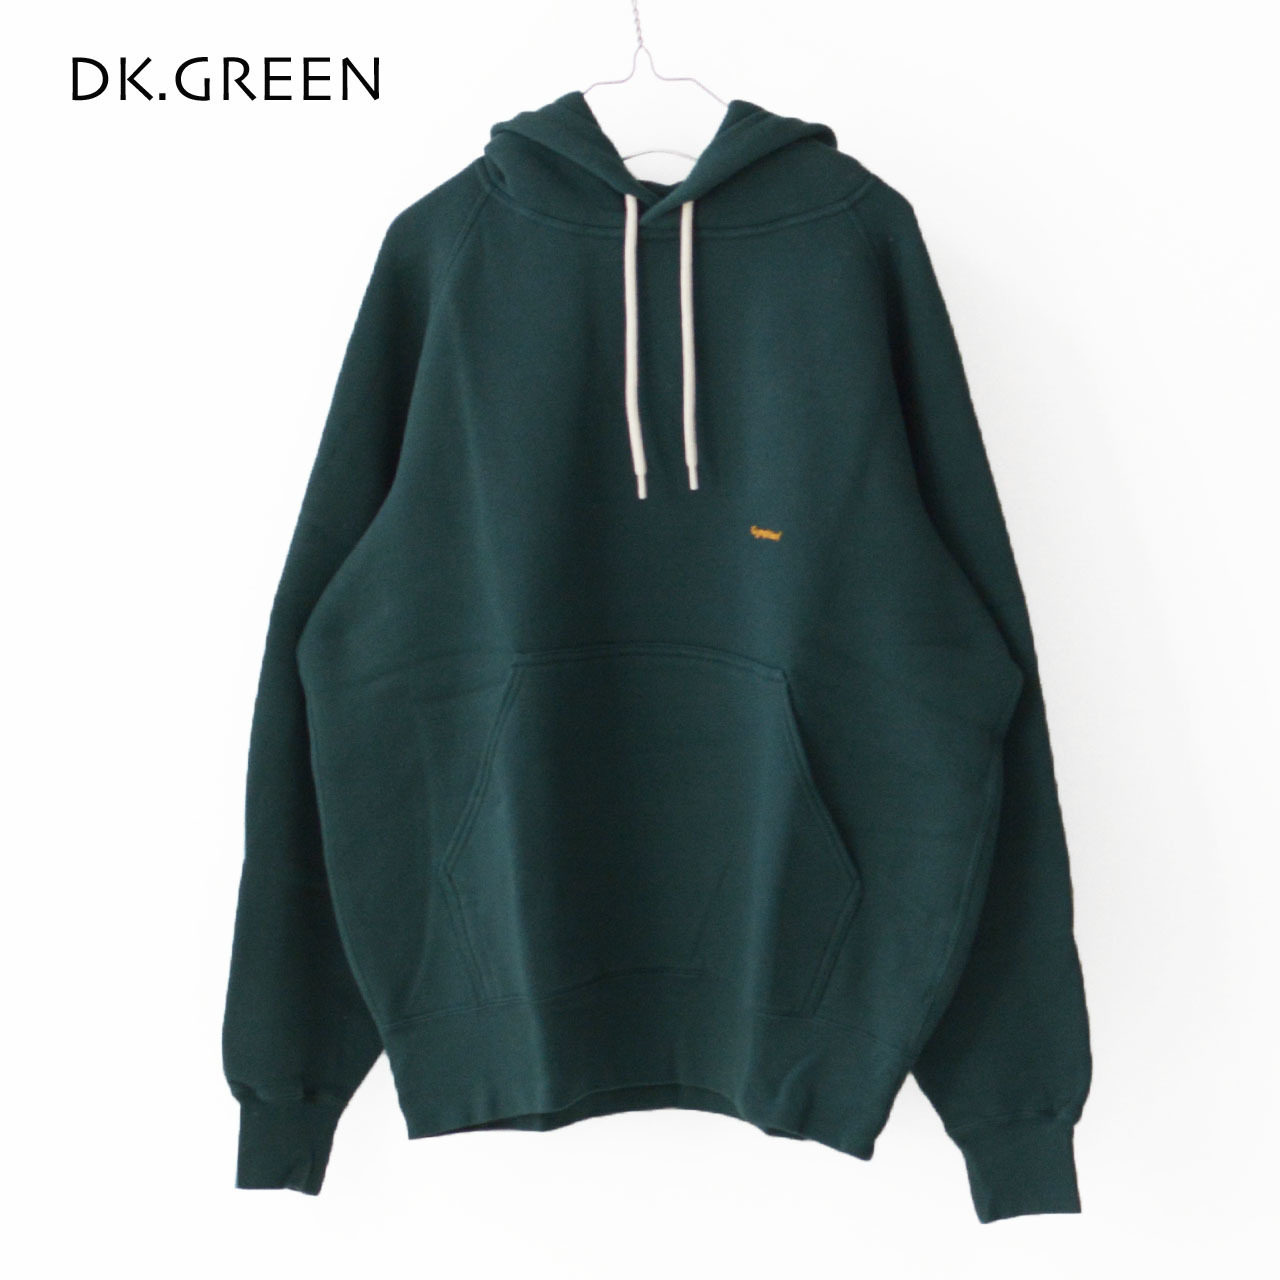 Gymphlex [ジムフレックス] SWING SLEEVE PULLOVER HOODIE [GY-C0014 ARB]_f0051306_13541310.jpg